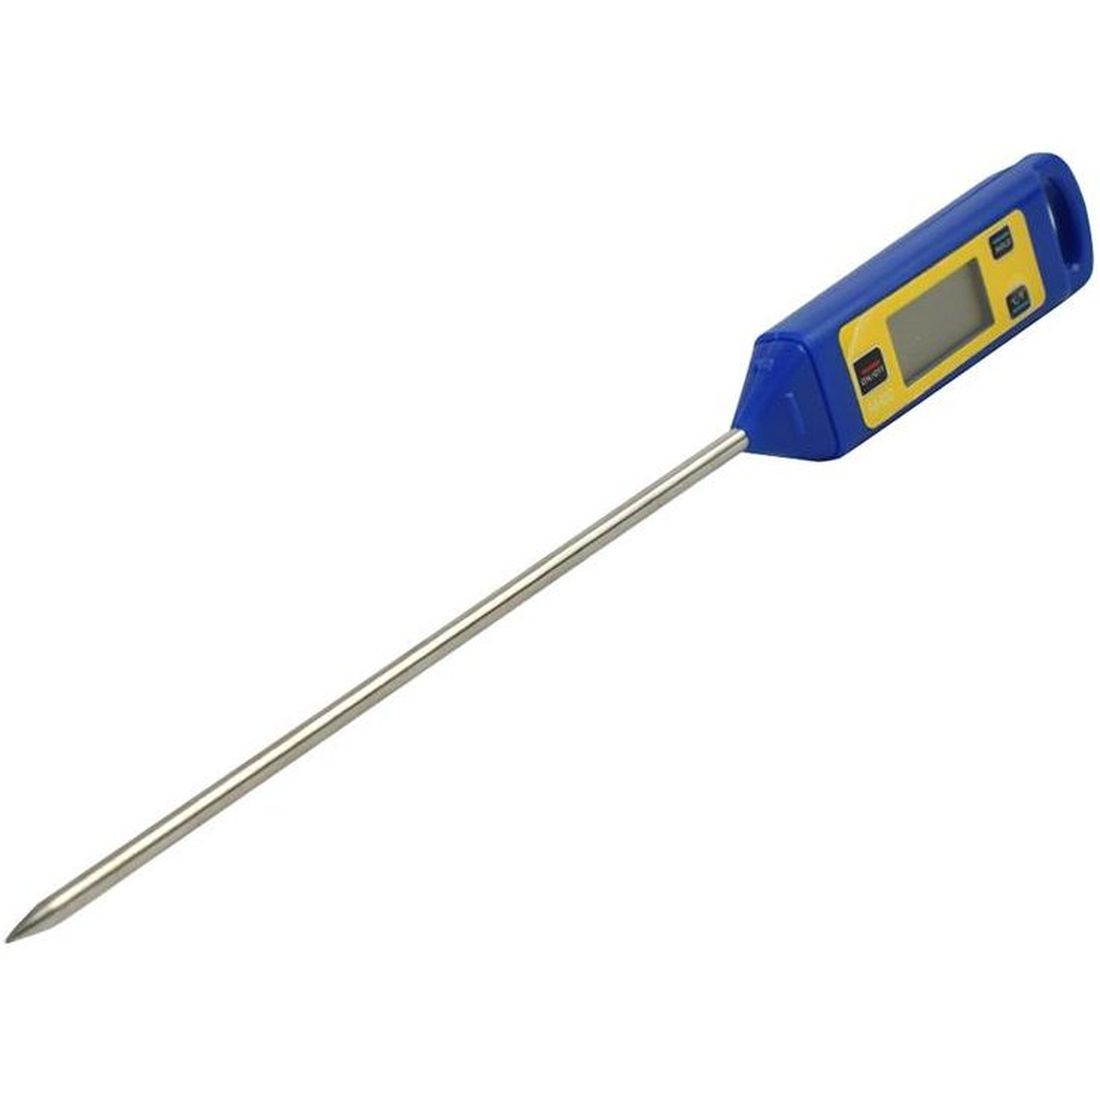 Arctic Hayes Stem Thermometer                  